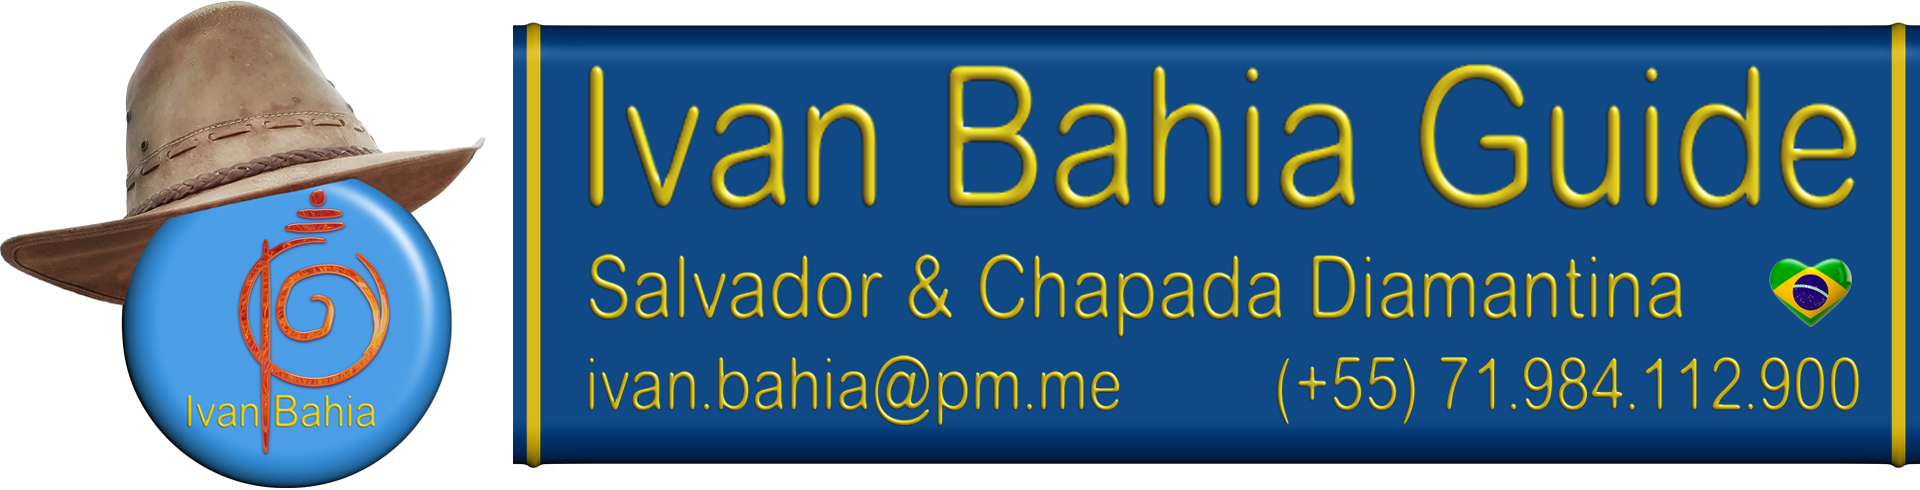 Discover Bahia with Ivan Bahia, travel agency in Salvador da Bahia, the original Capital of Brazil with TOP private tours & guides, your best experience (in English - Français - Nederlands) in Bahia, Chapada Diamantina National Park, All Saints Bay, Cachoeira, Recôncavo Baiano, Praia do Forte, Coconut coast and Bahia / NE-Brazil #ivanbahia #ivanbahiaguide #ivansalvadorbahia #salvadorbahiabrazil #bahiatourism #salvadorbahiatravel #toursbylocals #chapadadiamantinatransfer #chapadadiamantina #chapadaexperience #voyagebresil #bresilessentiel #salvadortourguide #chapadadiamantinatrekking #lencois #brazilhoneymoon #gaytravelinfo #gayhoneymoon #gayholiday #lgbttravel #lgbtqfriendly #lgbttourism #gayworldwide #gaytravelguide #gaytravelinsta #gayworld #gaystraveltoo #thegaypassport #wearetravelgays #gaycation #gaytravellers #gaytravel #gaytravelbrazil #reconcavobaiano #bahiaguide #bahiametisse #guidedetourismesalvadorbahiabresil #transatjacquesvabres #sailingbrazil #morrodopaiinacio #FotosChapadaDiamantina #BahiaTourism #SalvadorBahiaBrazil #FotosBahia #SalvadorBahiaTravel #tripadvisorsalvador #tripadvisorbahia #bahiatour #toursbahia #bahiatravel #salvadortourguide #fotosbahia #ssalovers #voyagegay #voyagelgbt #gayvoyageur #gayvoyages #gaytravelbrazil #lgbtq+friendly #instagay #gaytravelinfo #gayhoneymoon #gayholiday #lgbttravel #lgbtqfriendly #lgbttourism #lgbtq #lgbtqtravel #gayworldwide #gaytravelguide #gaytravelinsta #gayworld #gaystraveltoo #thegaypassport #gaytravelers #wearetravelgays #gaycation #gaytravellers #gaytravel #gaytravelinsta #gaytourist #lgbtqtravelers 